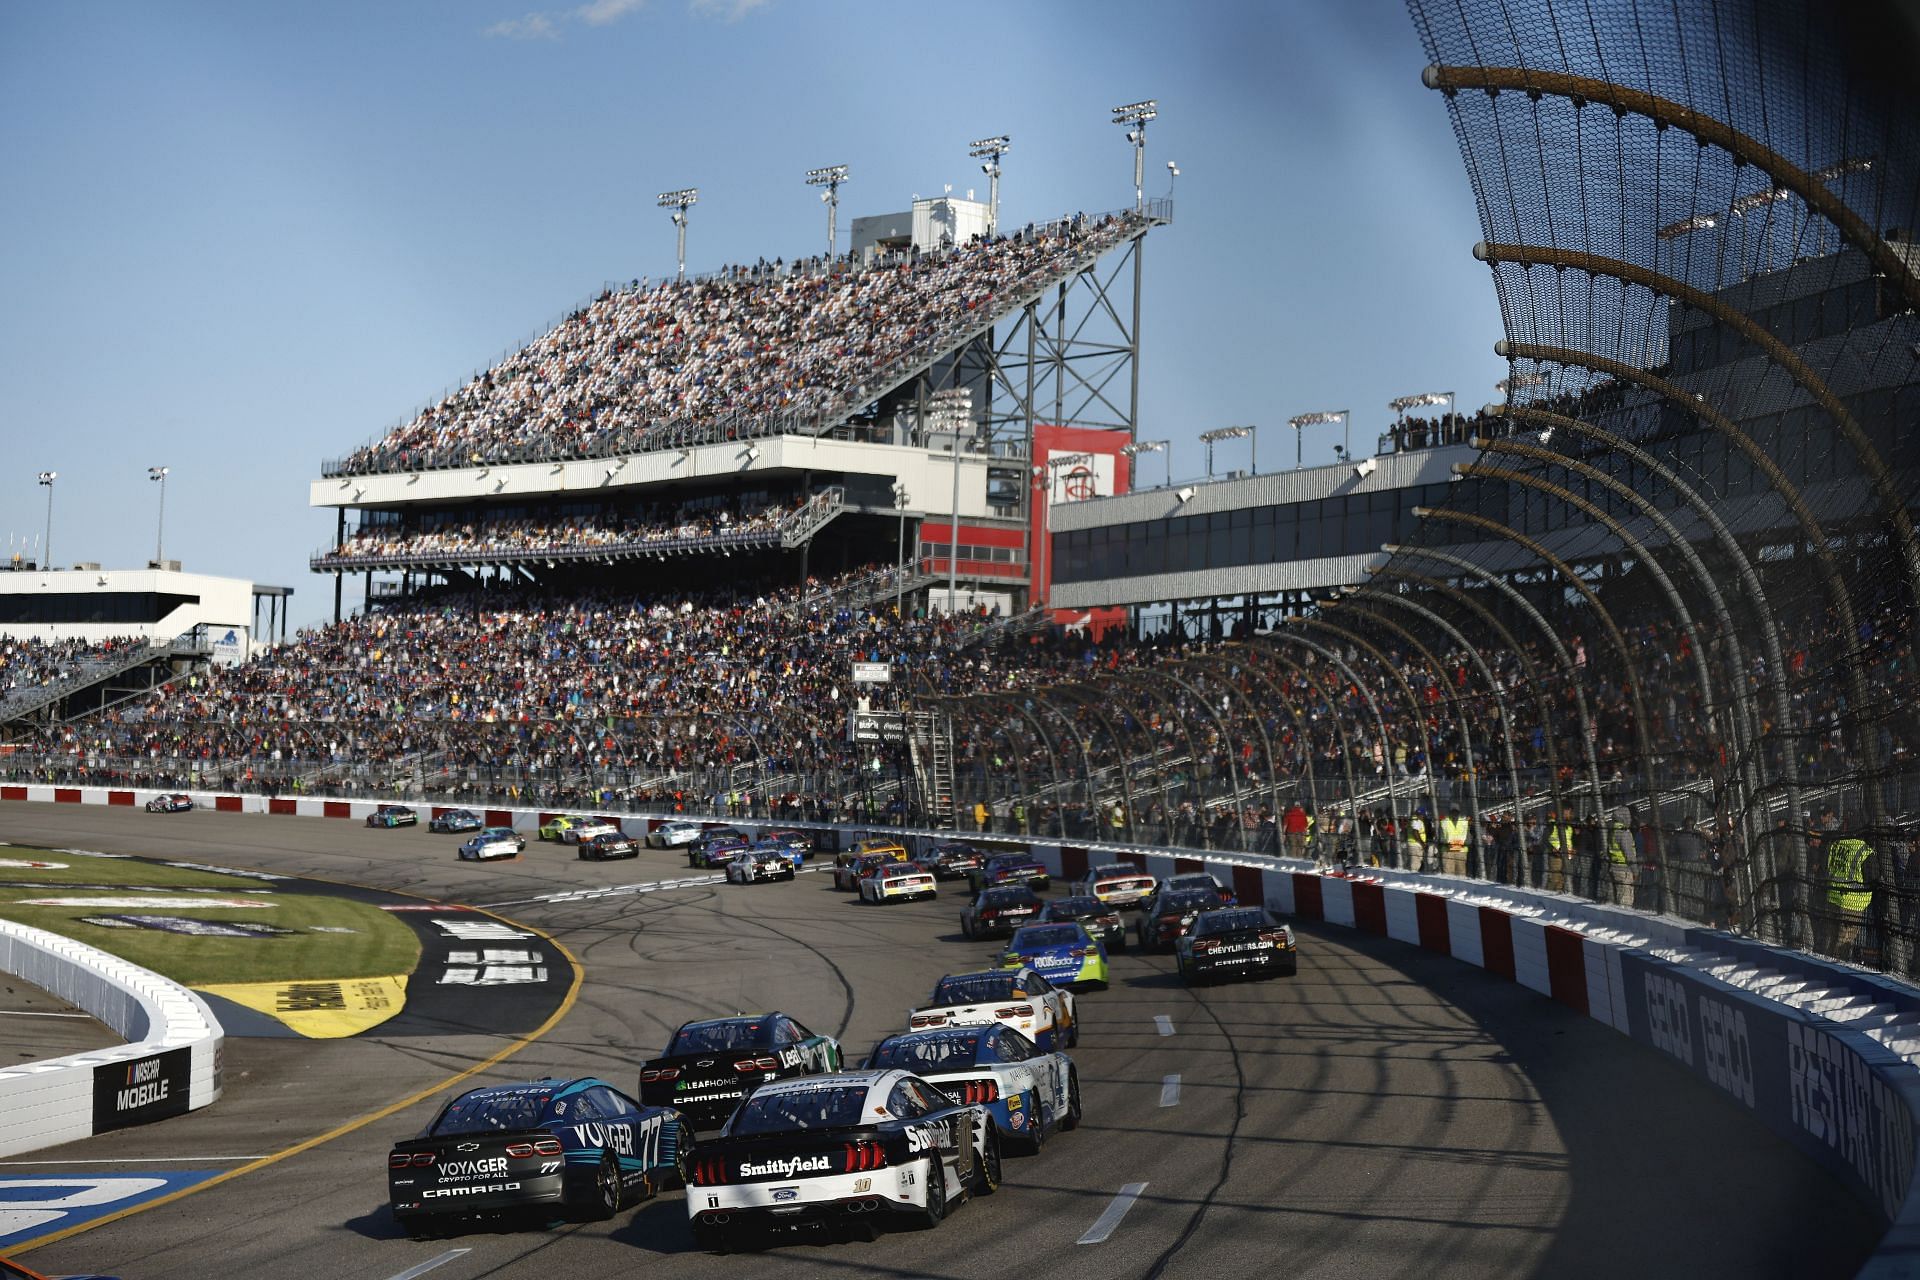 Cars race during the 2022 NASCAR Cup Series Toyota Owners 400 at Richmond Raceway in Richmond, Virginia (Photo by Jared C. Tilton/Getty Images)